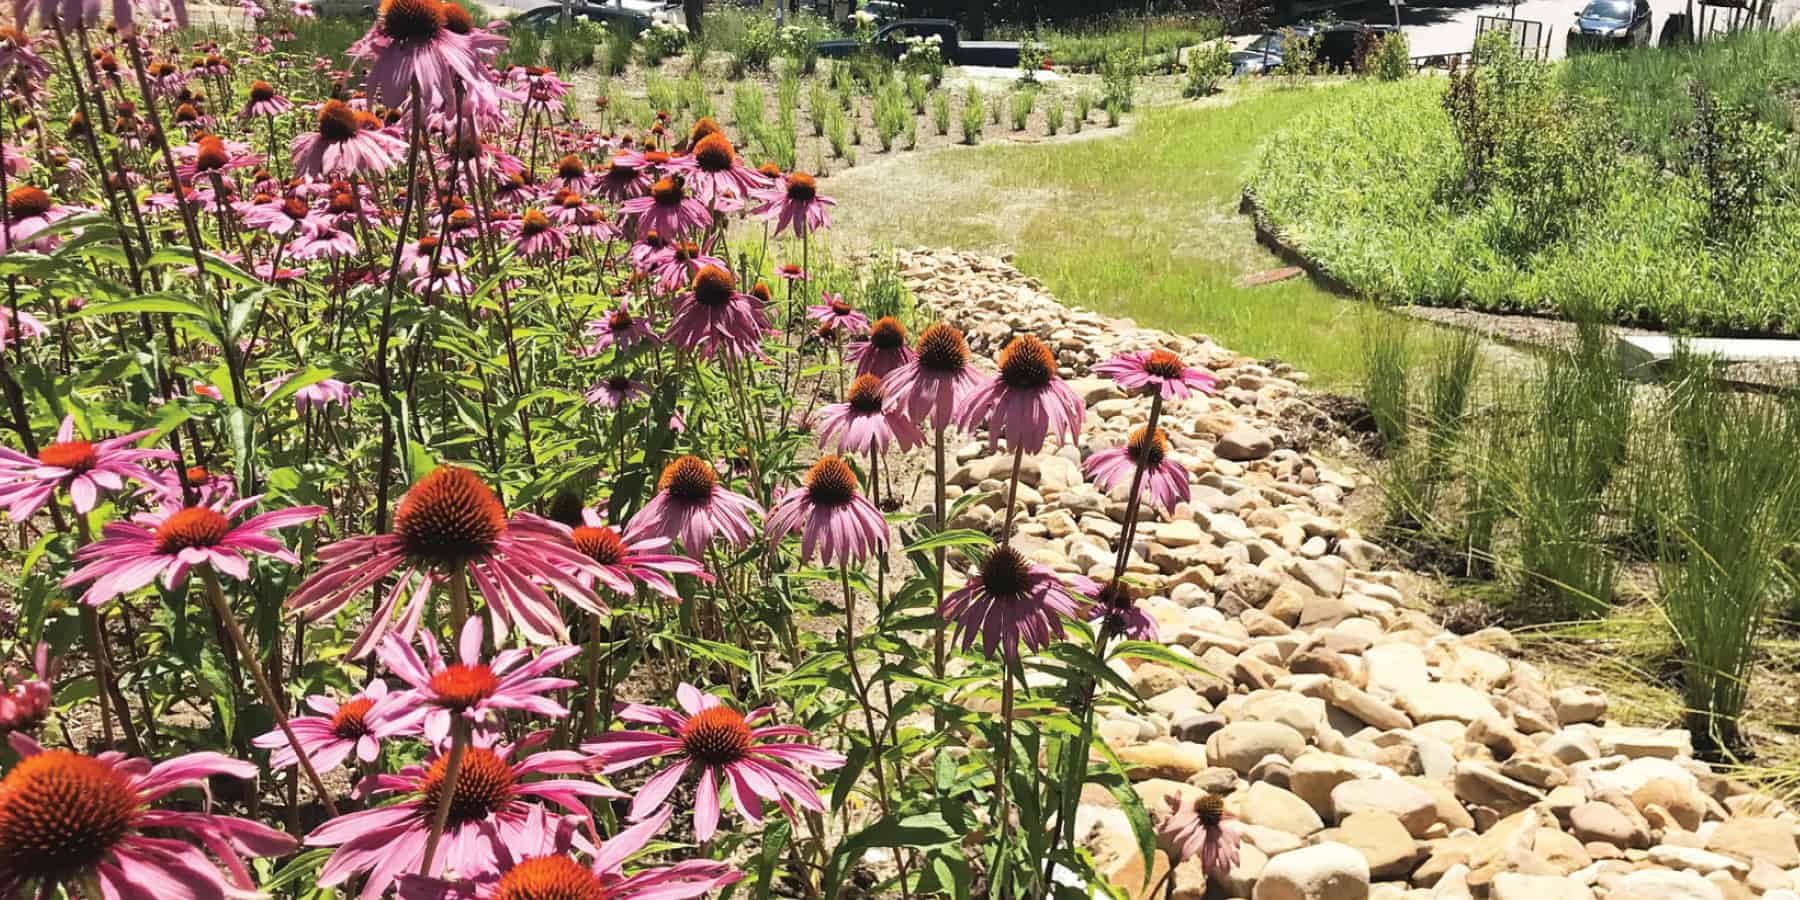 Flowers that are thriving after the implementation of urban green infrastructure